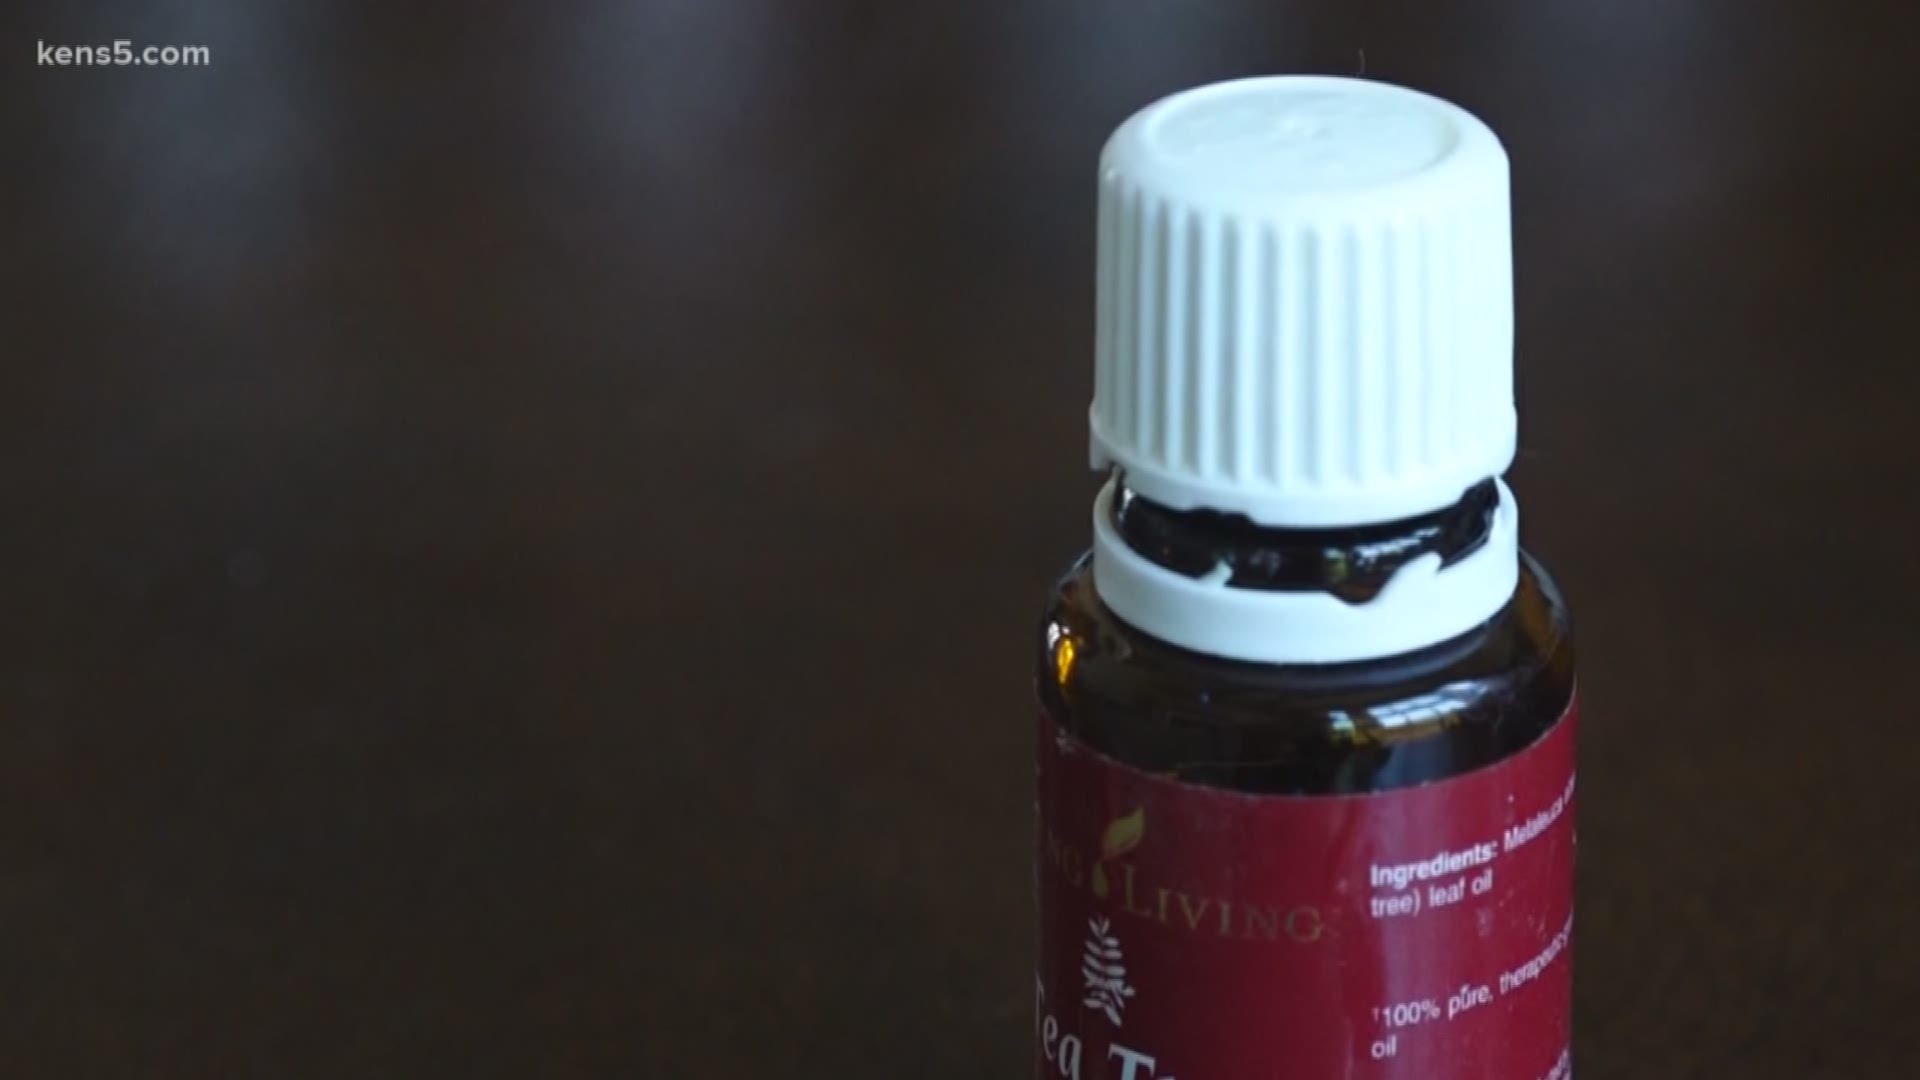 You've likely spotted them on store shelves... Concentrated bottles of essential oils! They're gaining in popularity - and are often used to reduce pain, manage anxiety and help people sleep better. Eyewitness News reporter Sharon Ko has the story on the